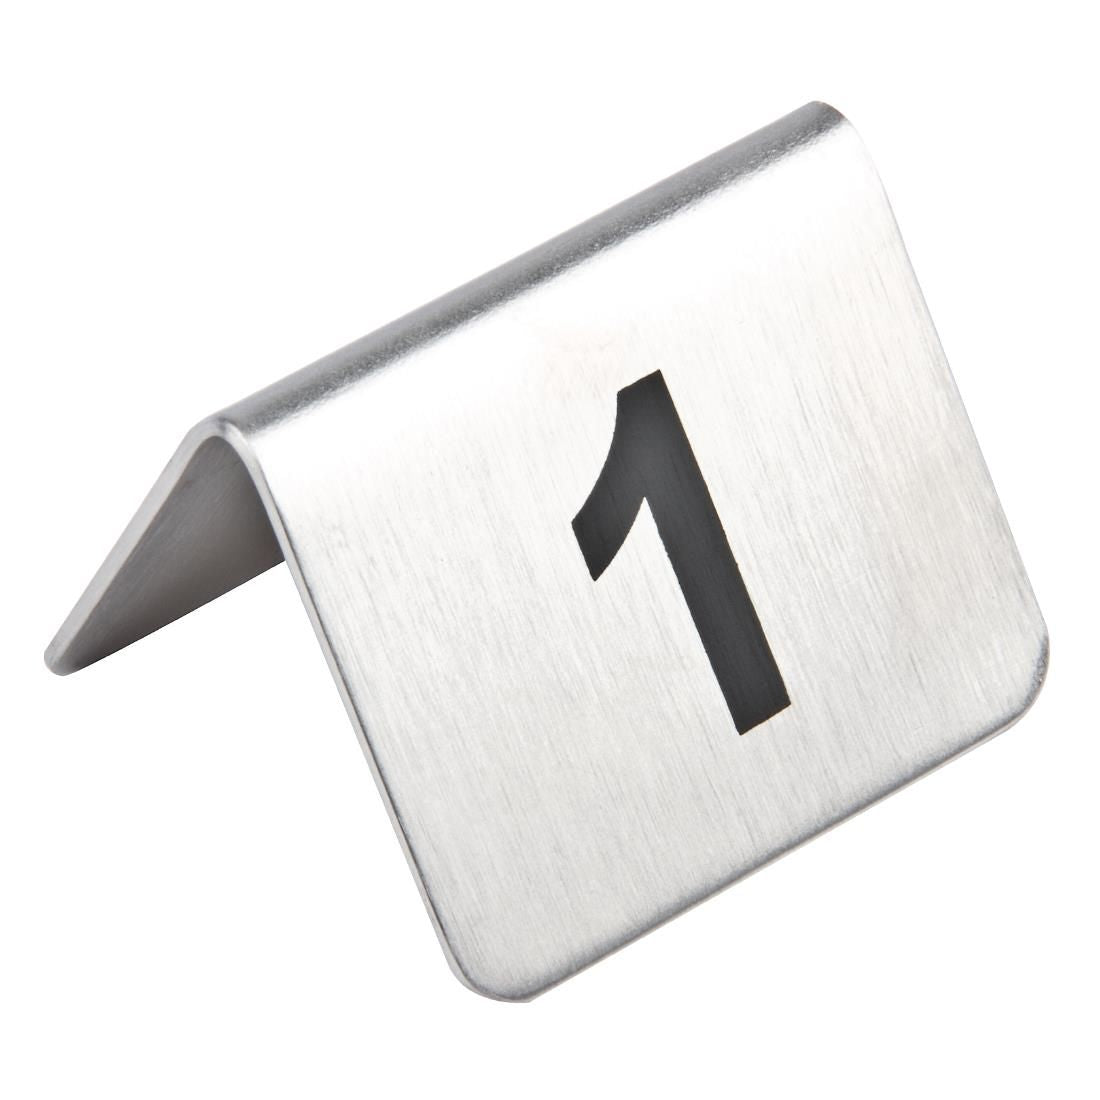 U047 Olympia Stainless Steel Table Numbers 11-20 (Pack of 10)